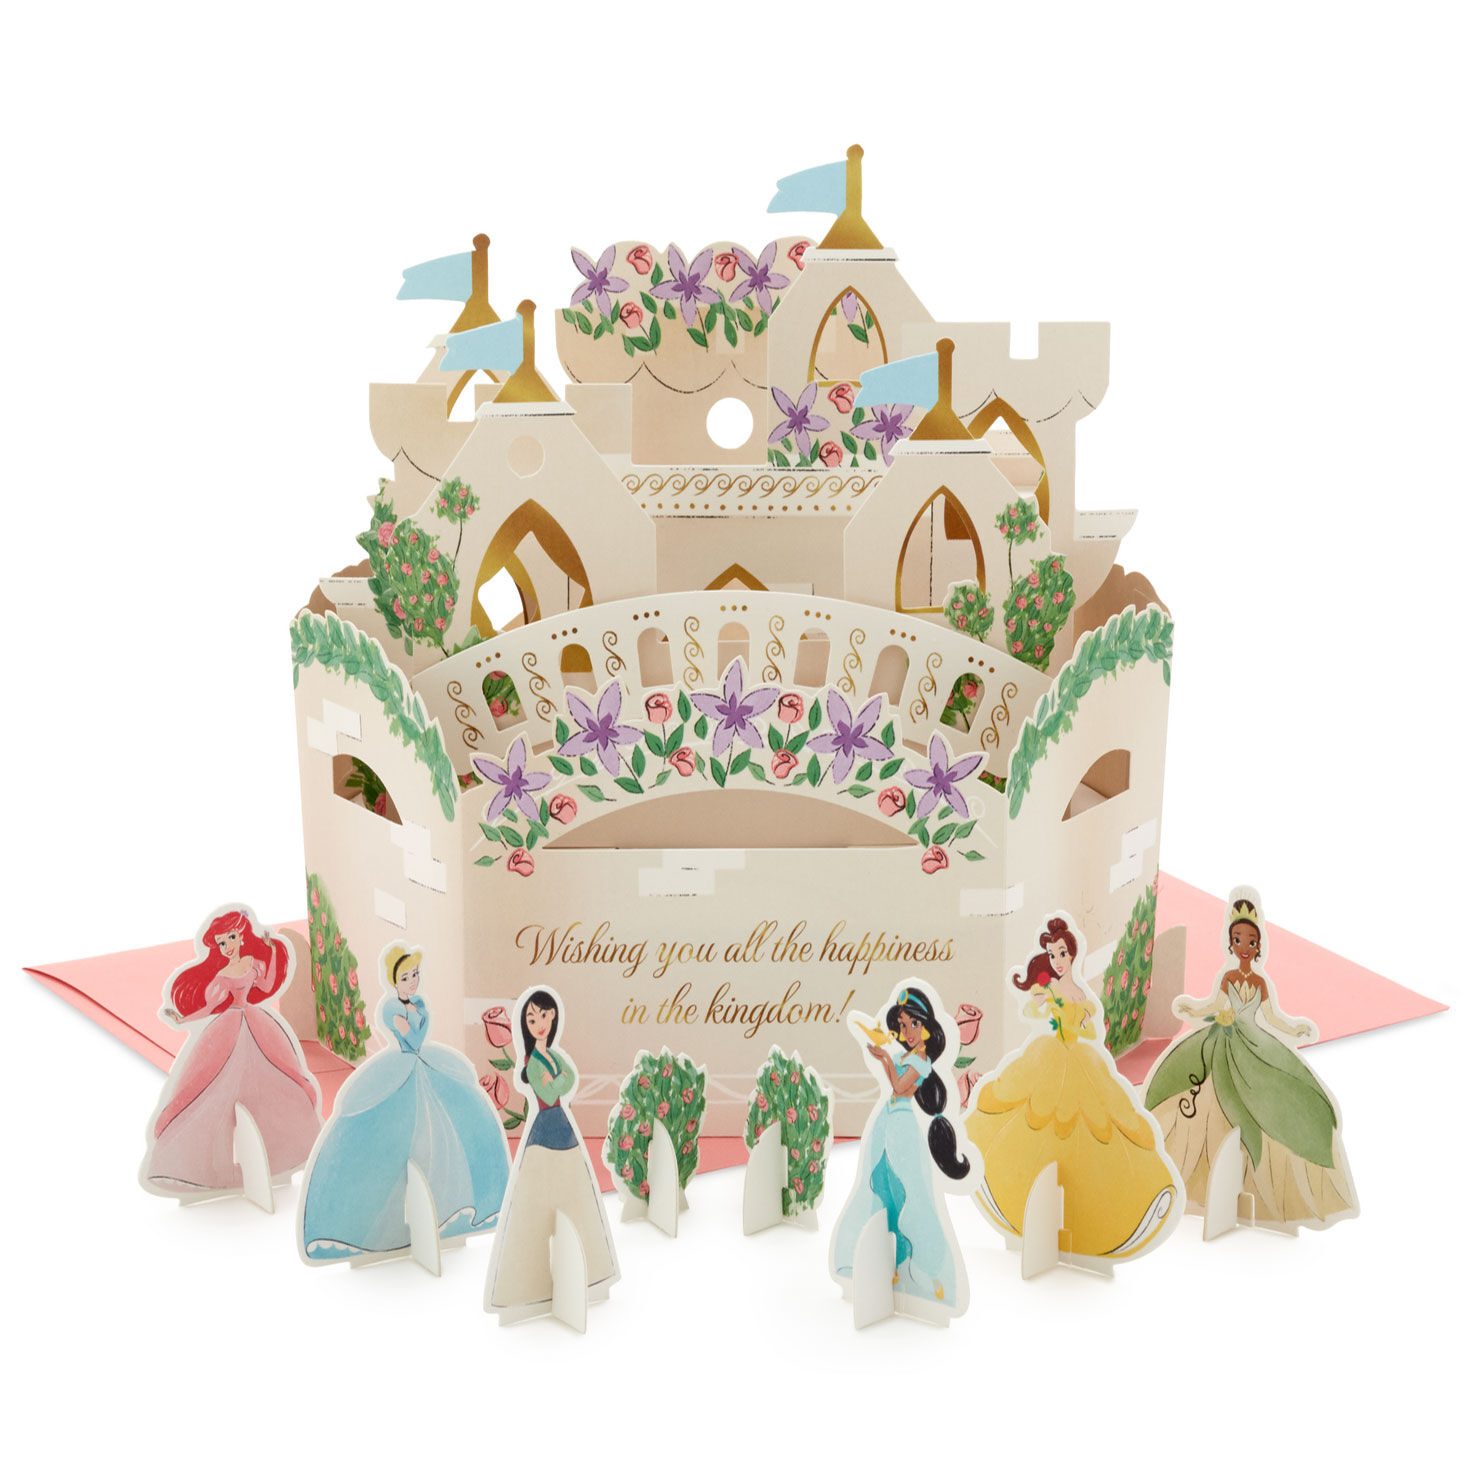 Disney Princess Castle All the Happiness 3D Pop-Up Card With Playset for only USD 8.99 | Hallmark